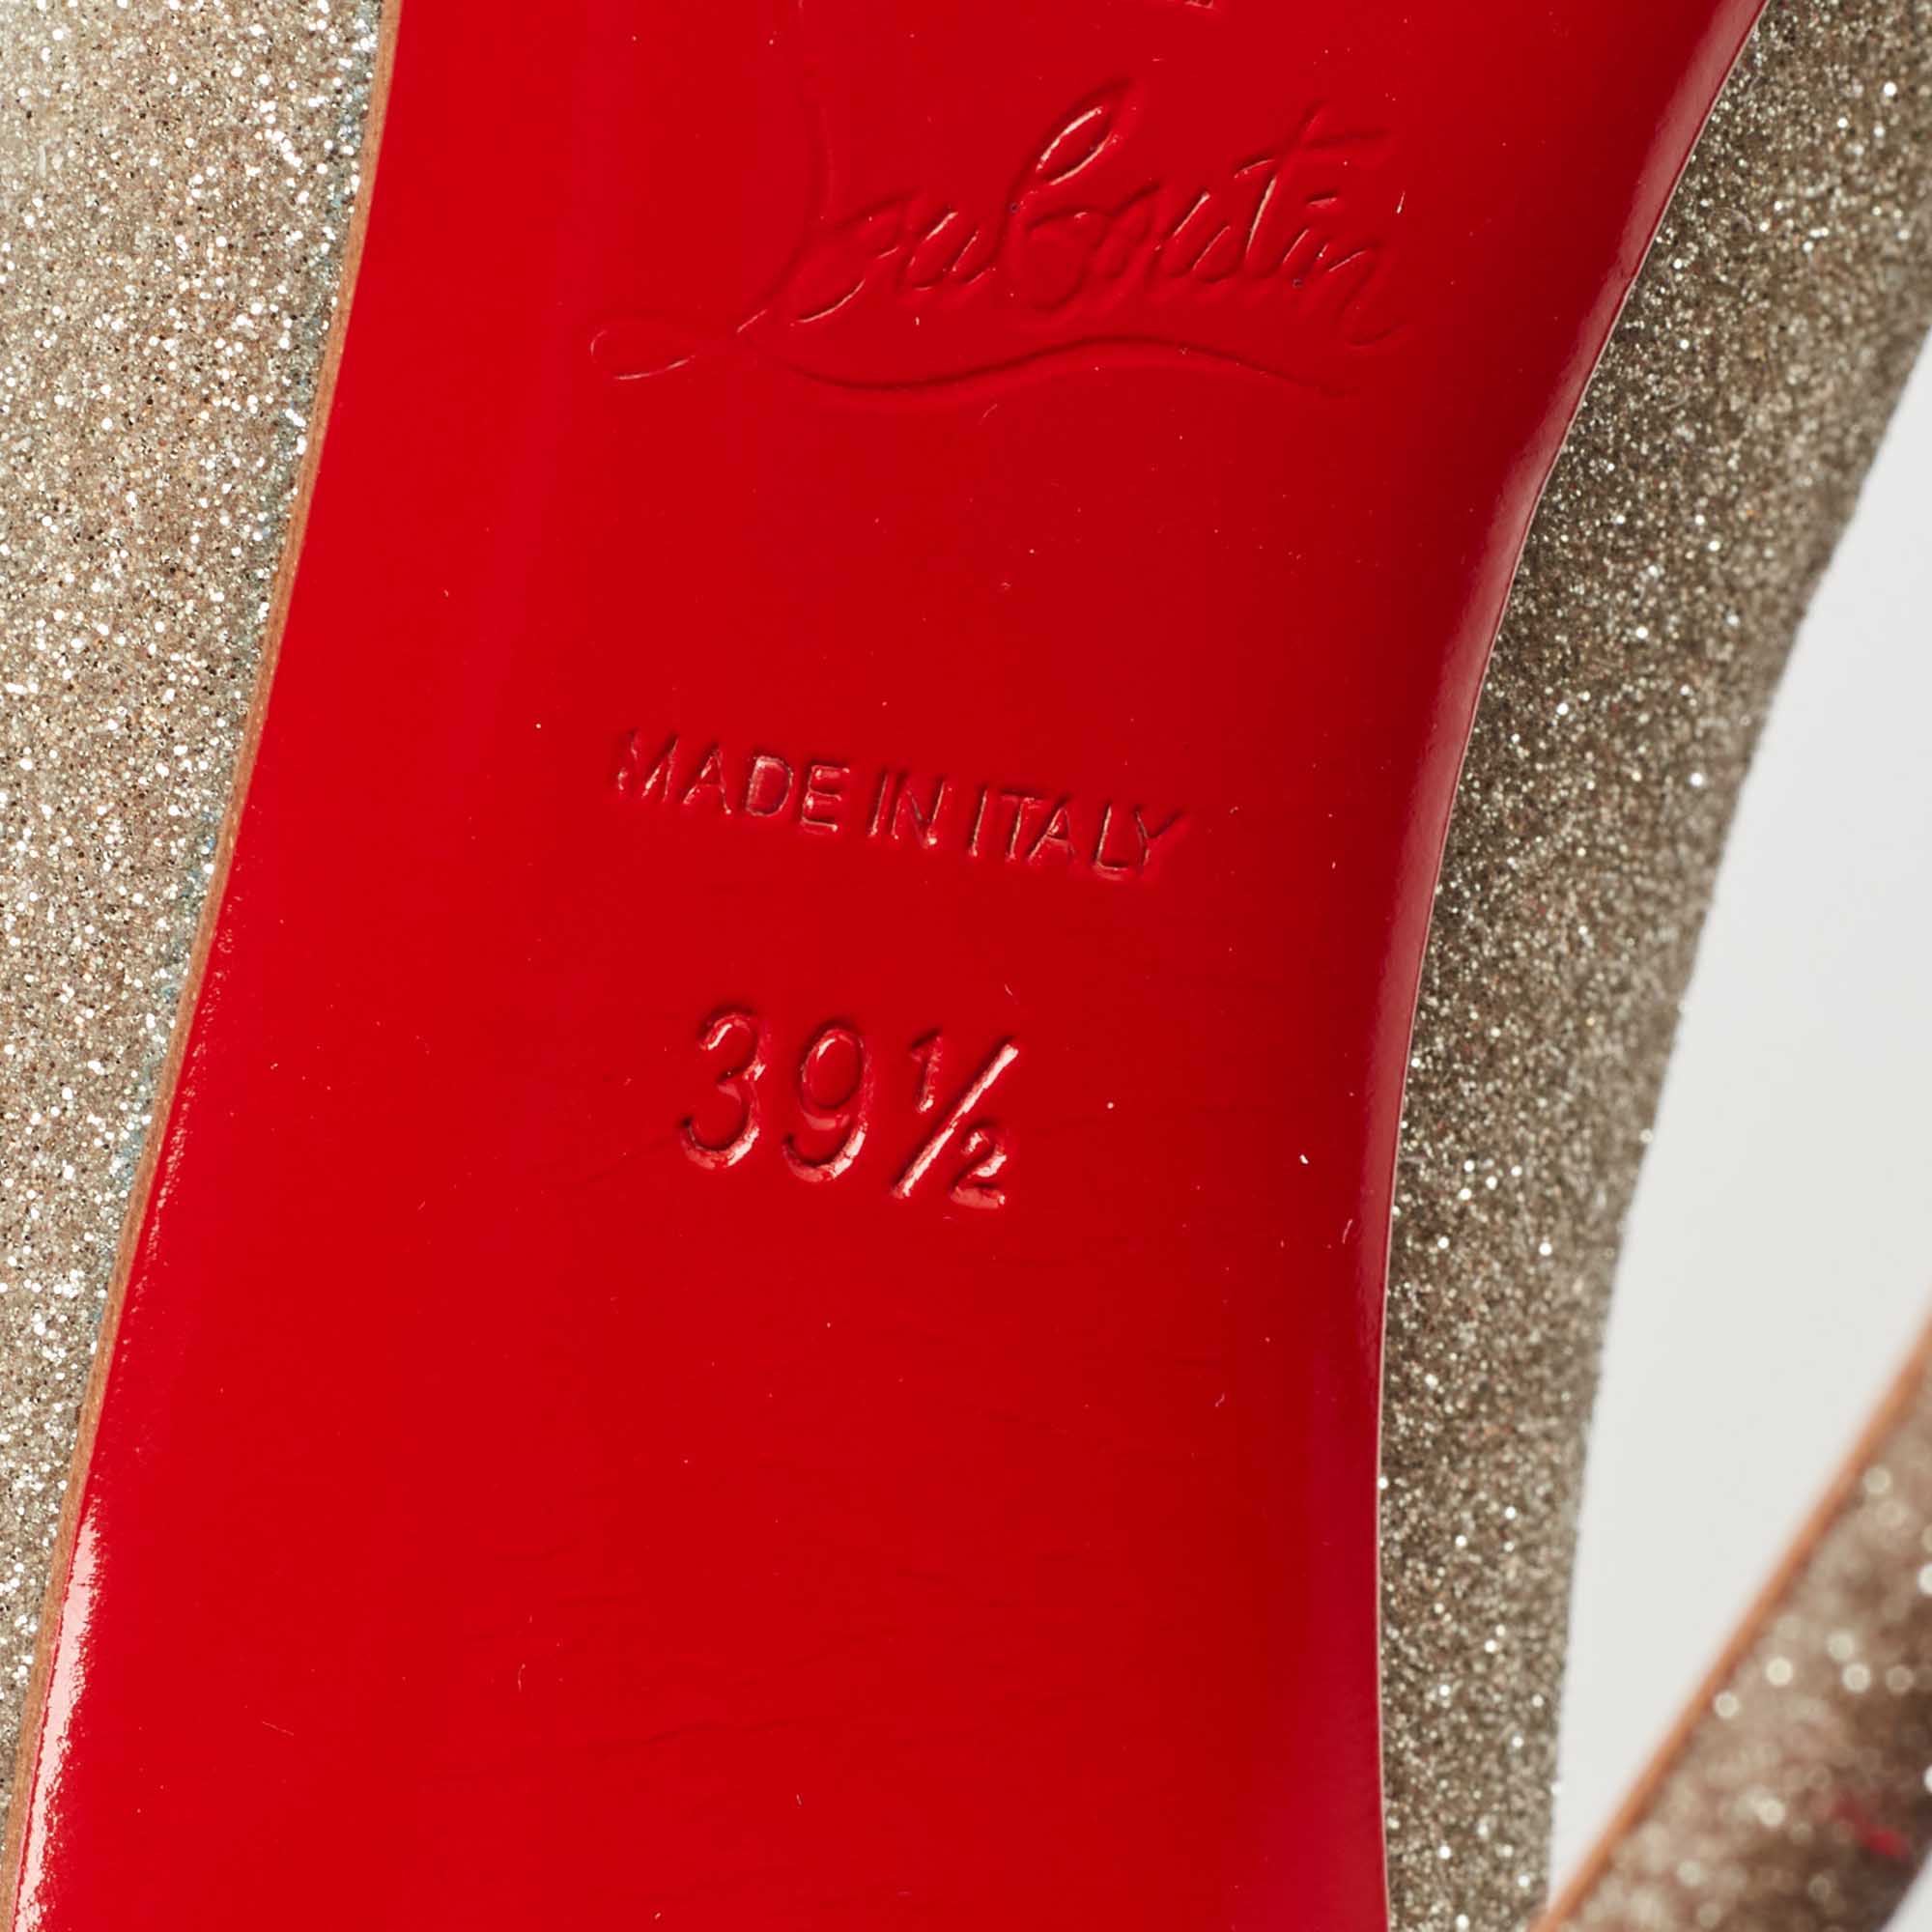 Christian Louboutin Gold Glitter And Leather Front Double Pumps Size 39.5